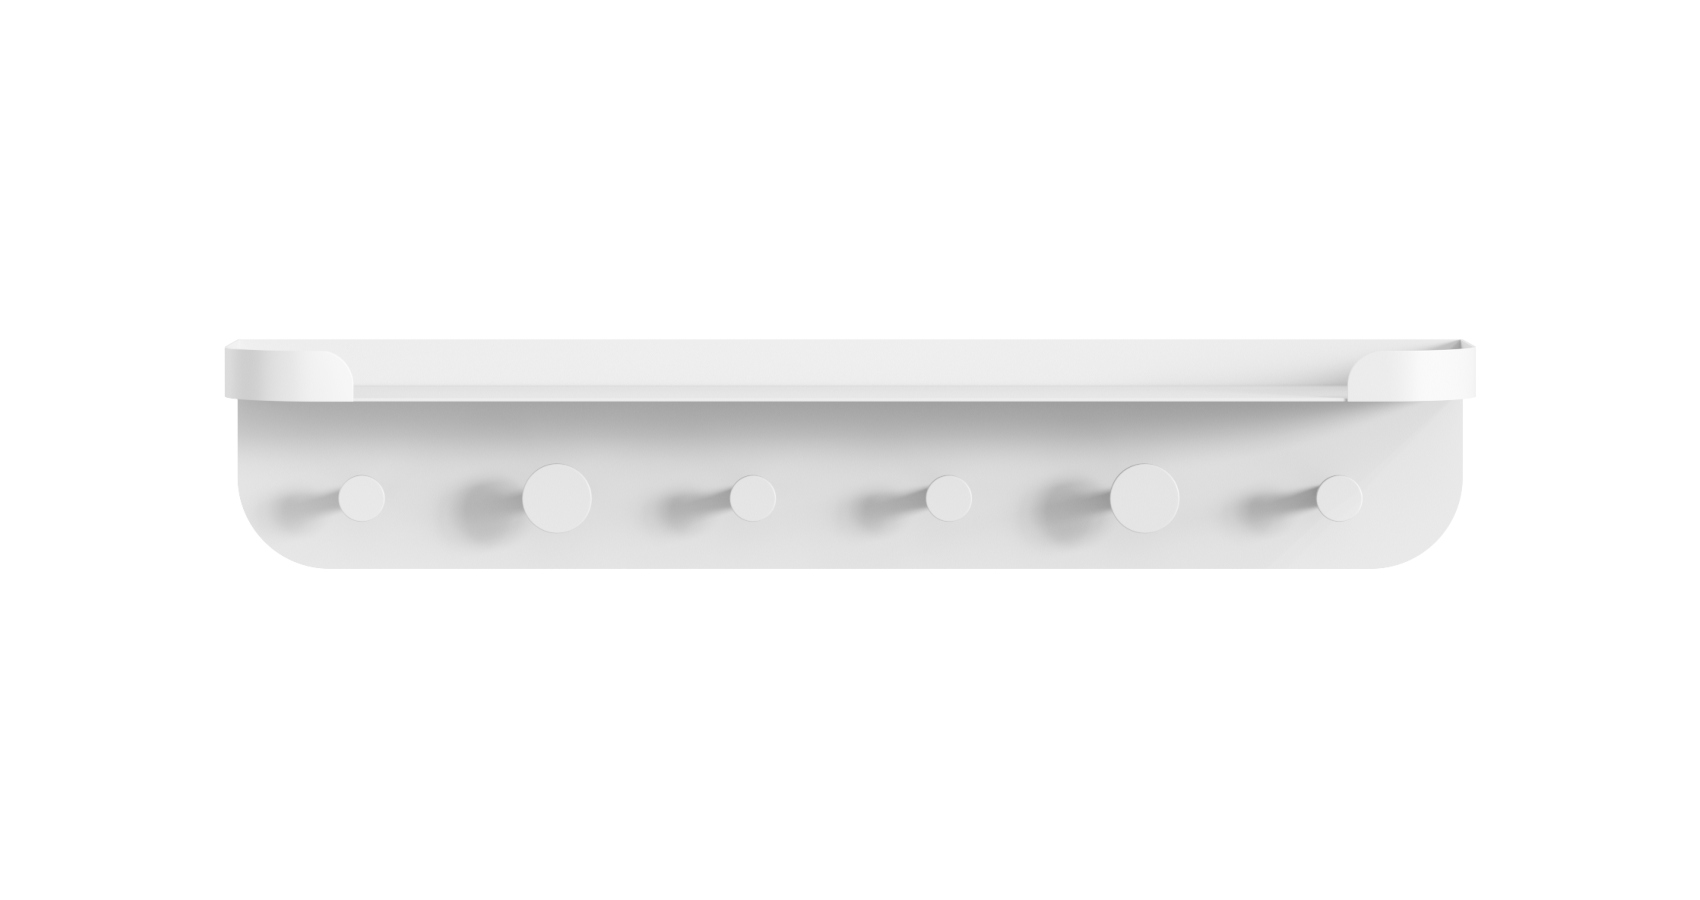 Buddi Coat Hook and Shelf in White in direct front view